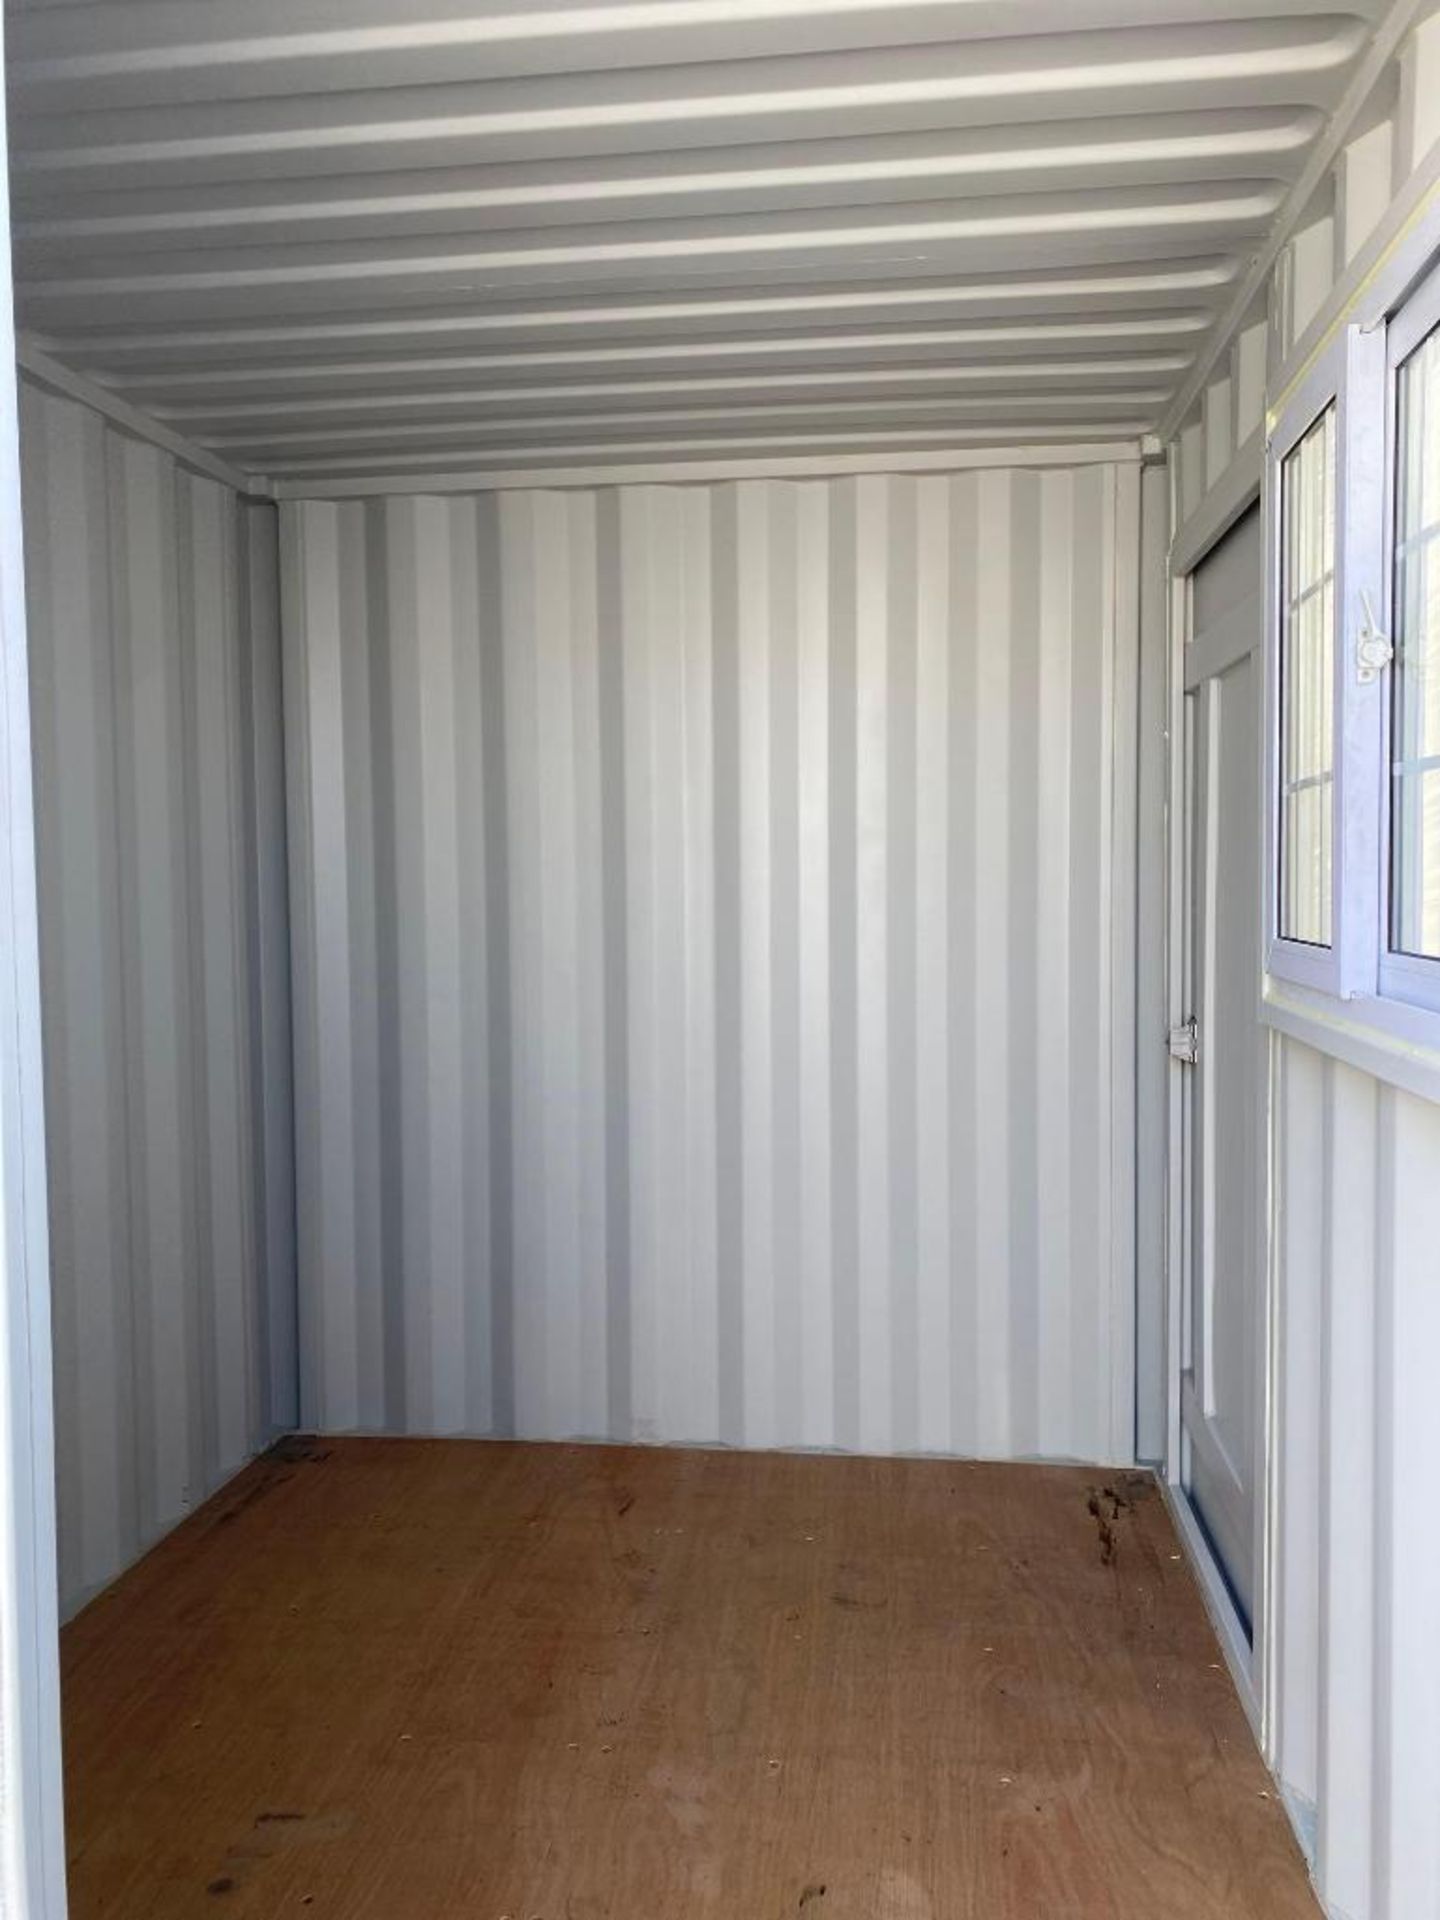 New Chery 9ft Steel Shipping Container/ Office/ Storage Unit - Image 2 of 3